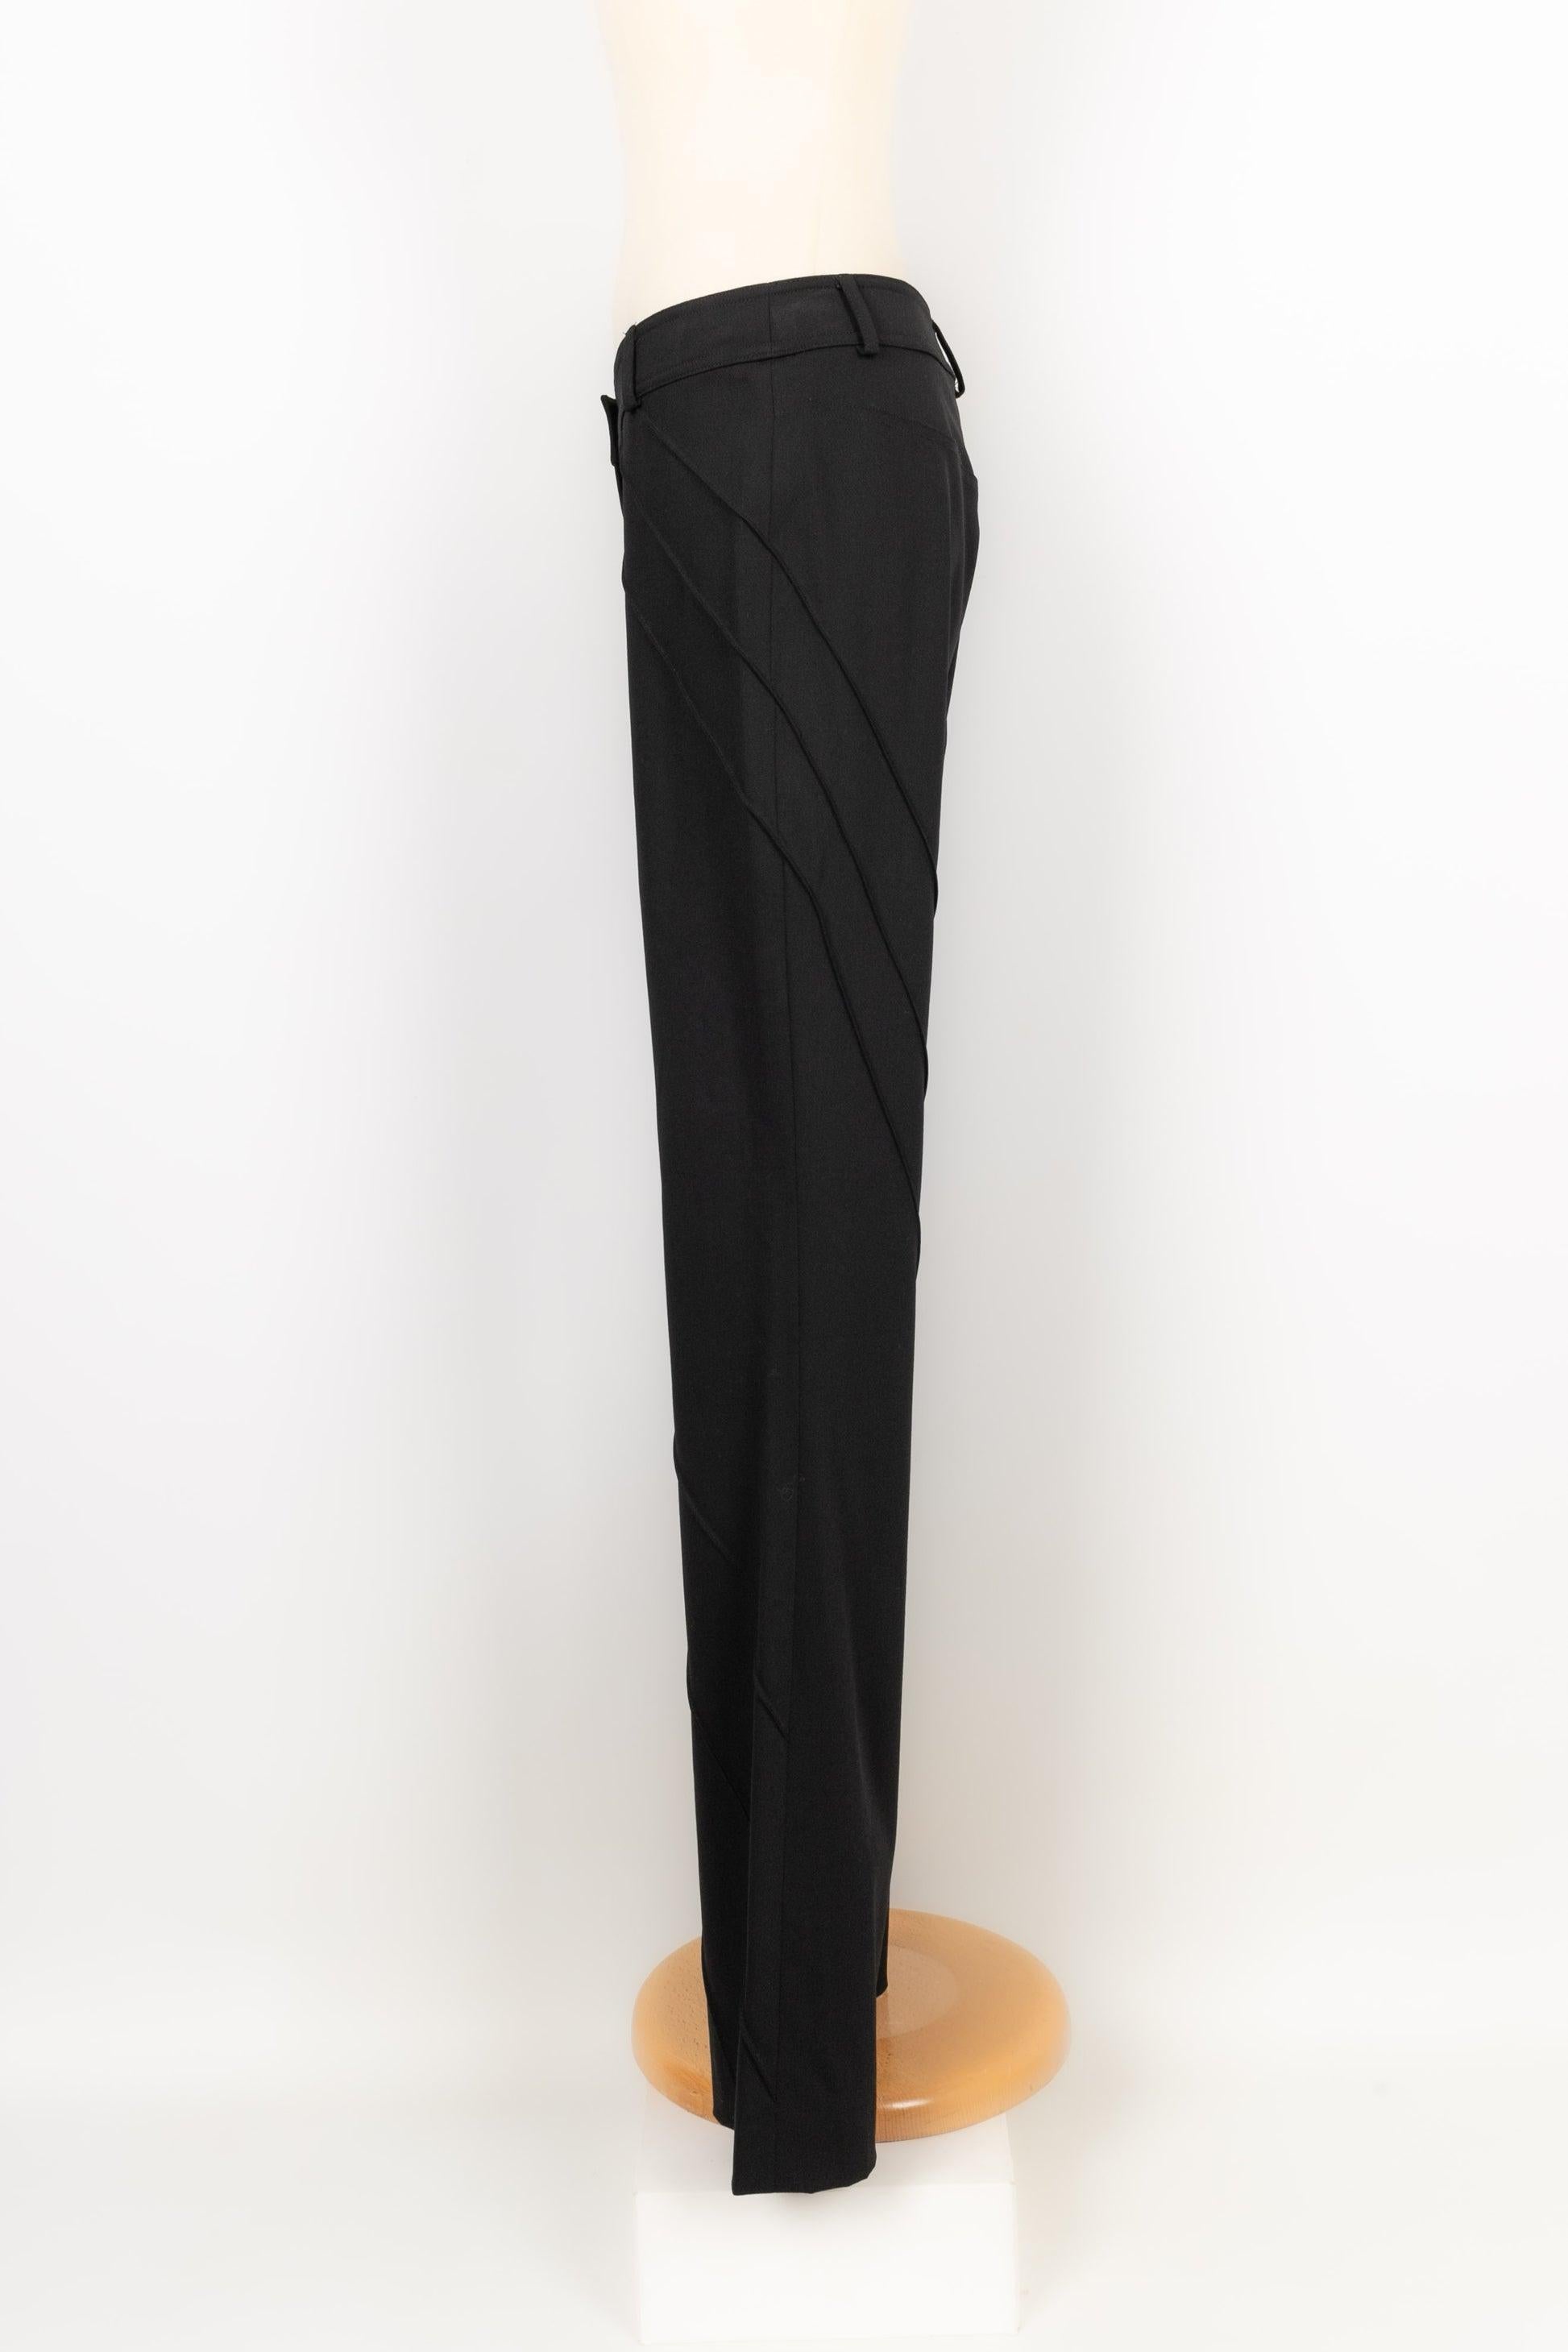 Dior - (Made in France) Black blended wool pants. Indicated size 38FR.

Additional information:
Condition: Very good condition
Dimensions: Waist: 40 cm - Length: 103 cm

Seller Reference: FJ78
